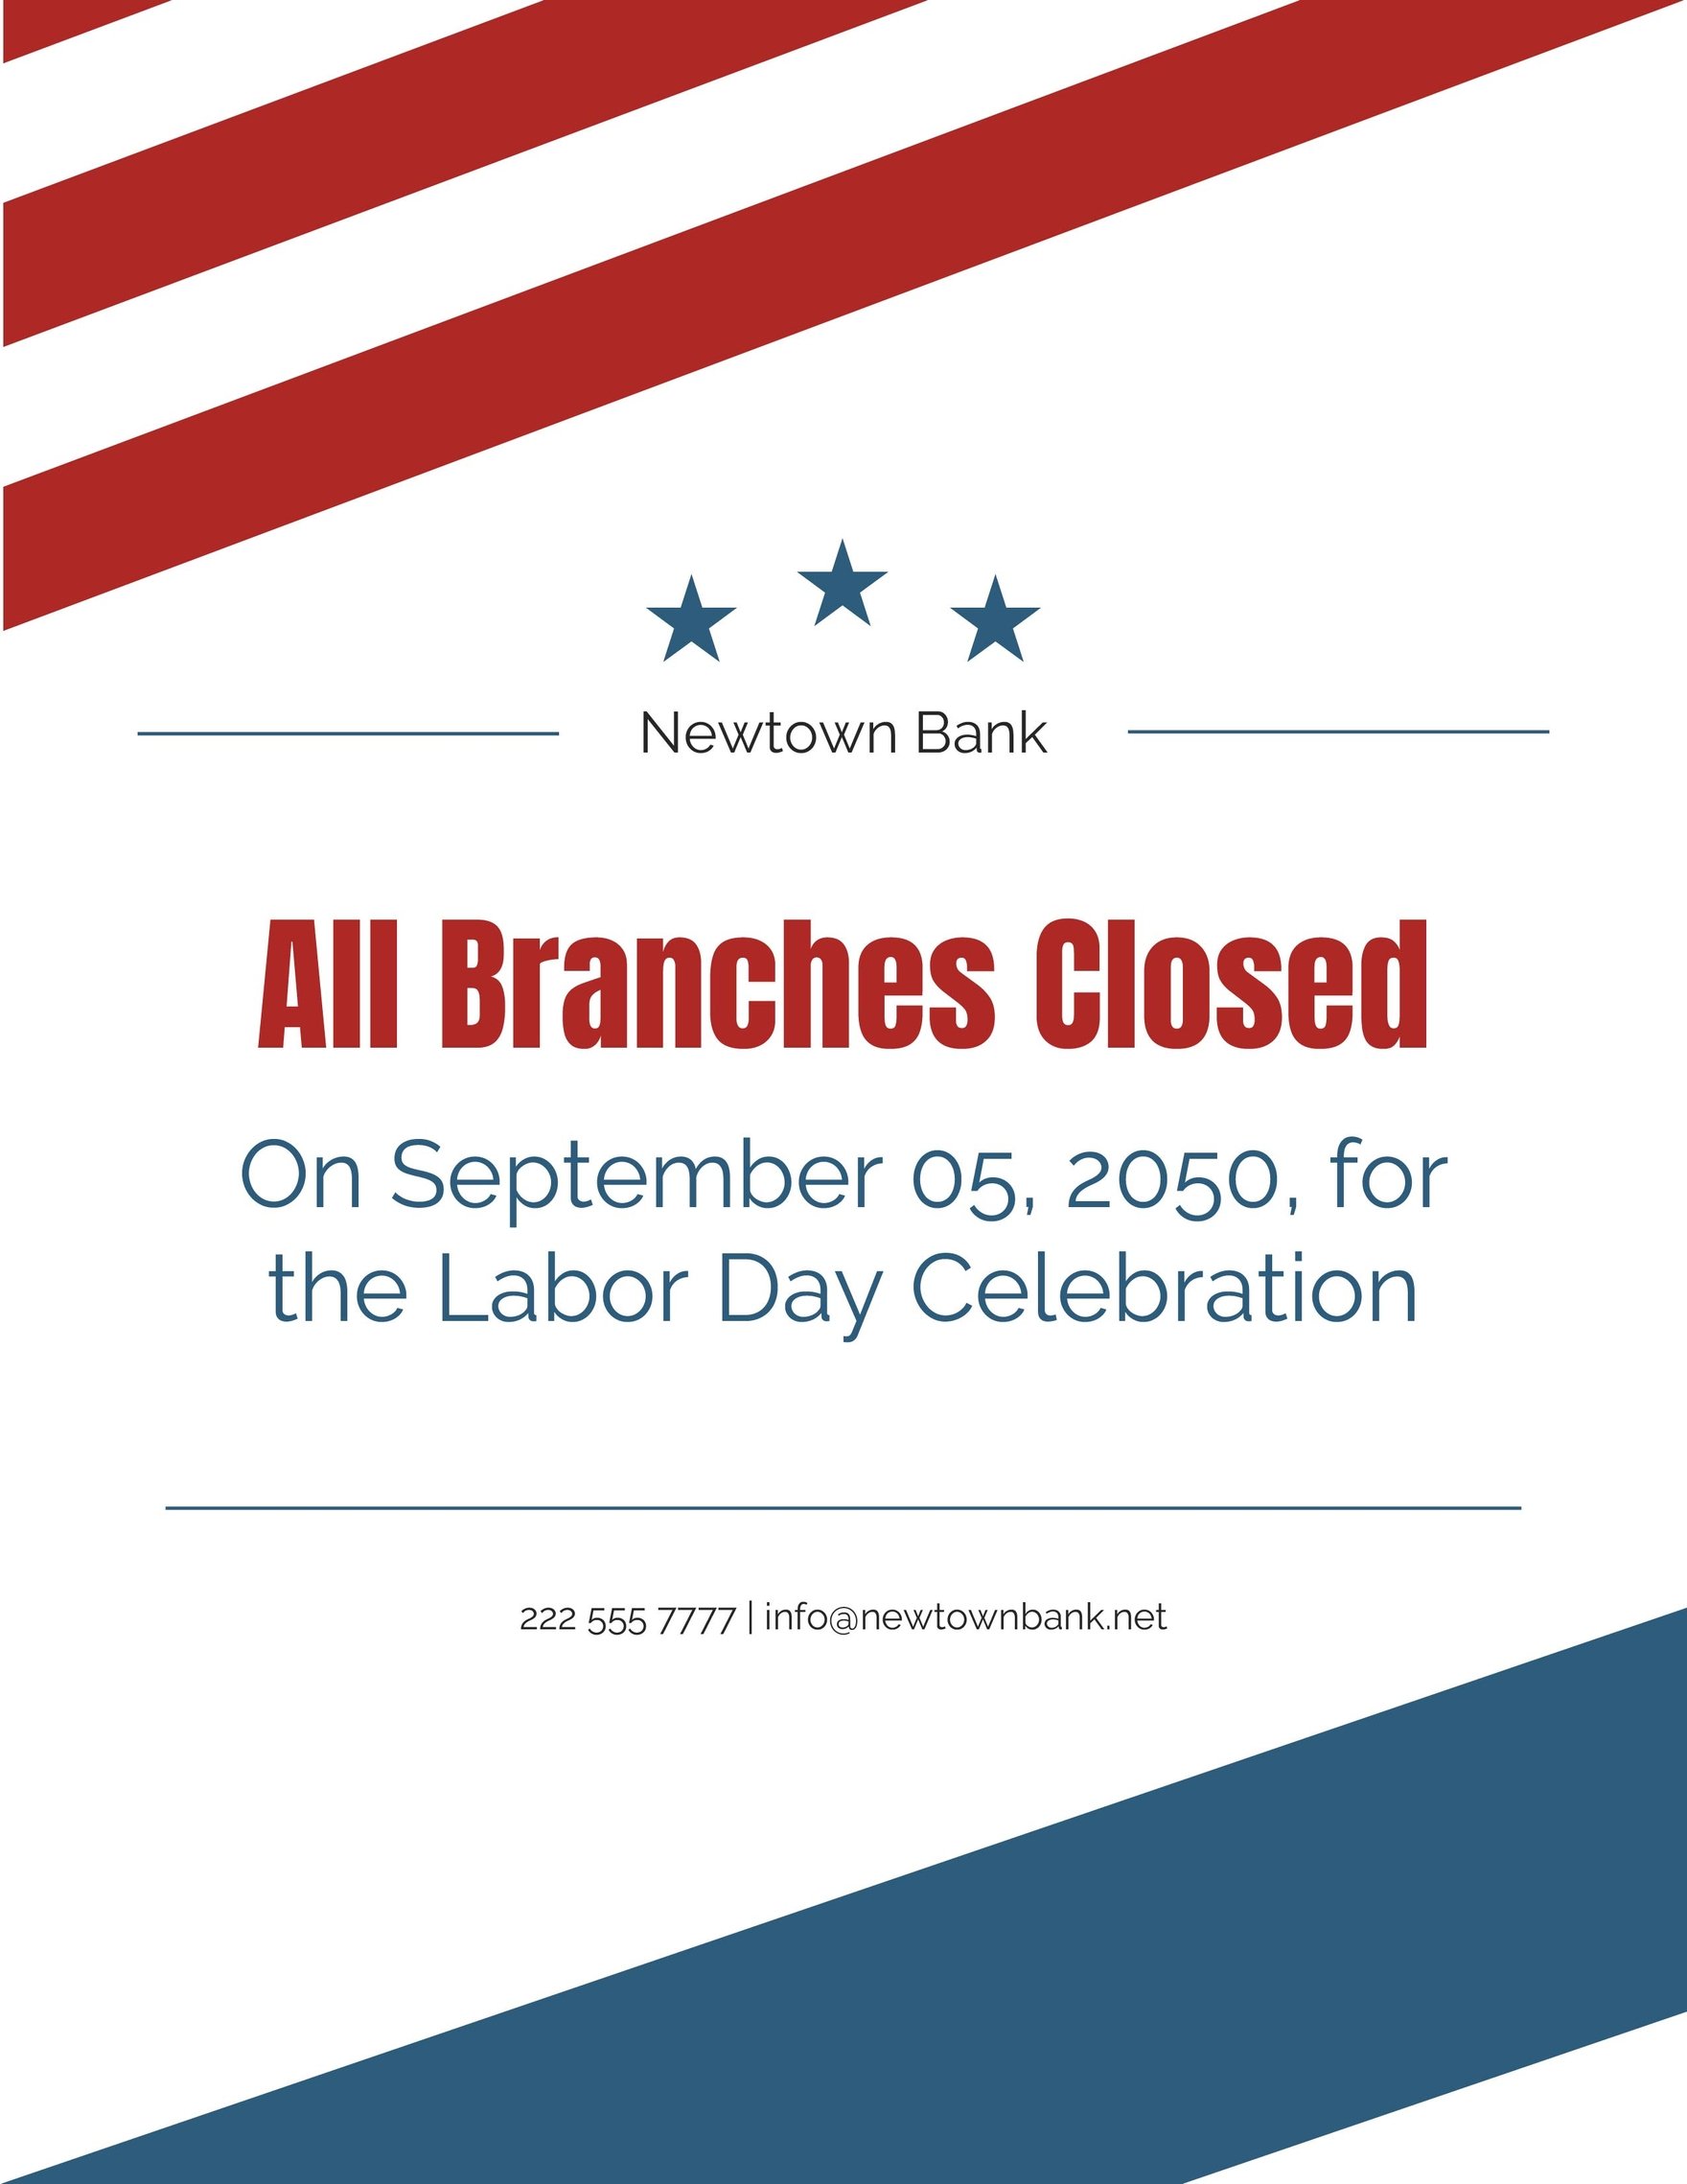 Free Closed Labor Day Flyer Template in Word, Google Docs, Illustrator, PSD, Apple Pages, EPS, SVG, JPG, PNG